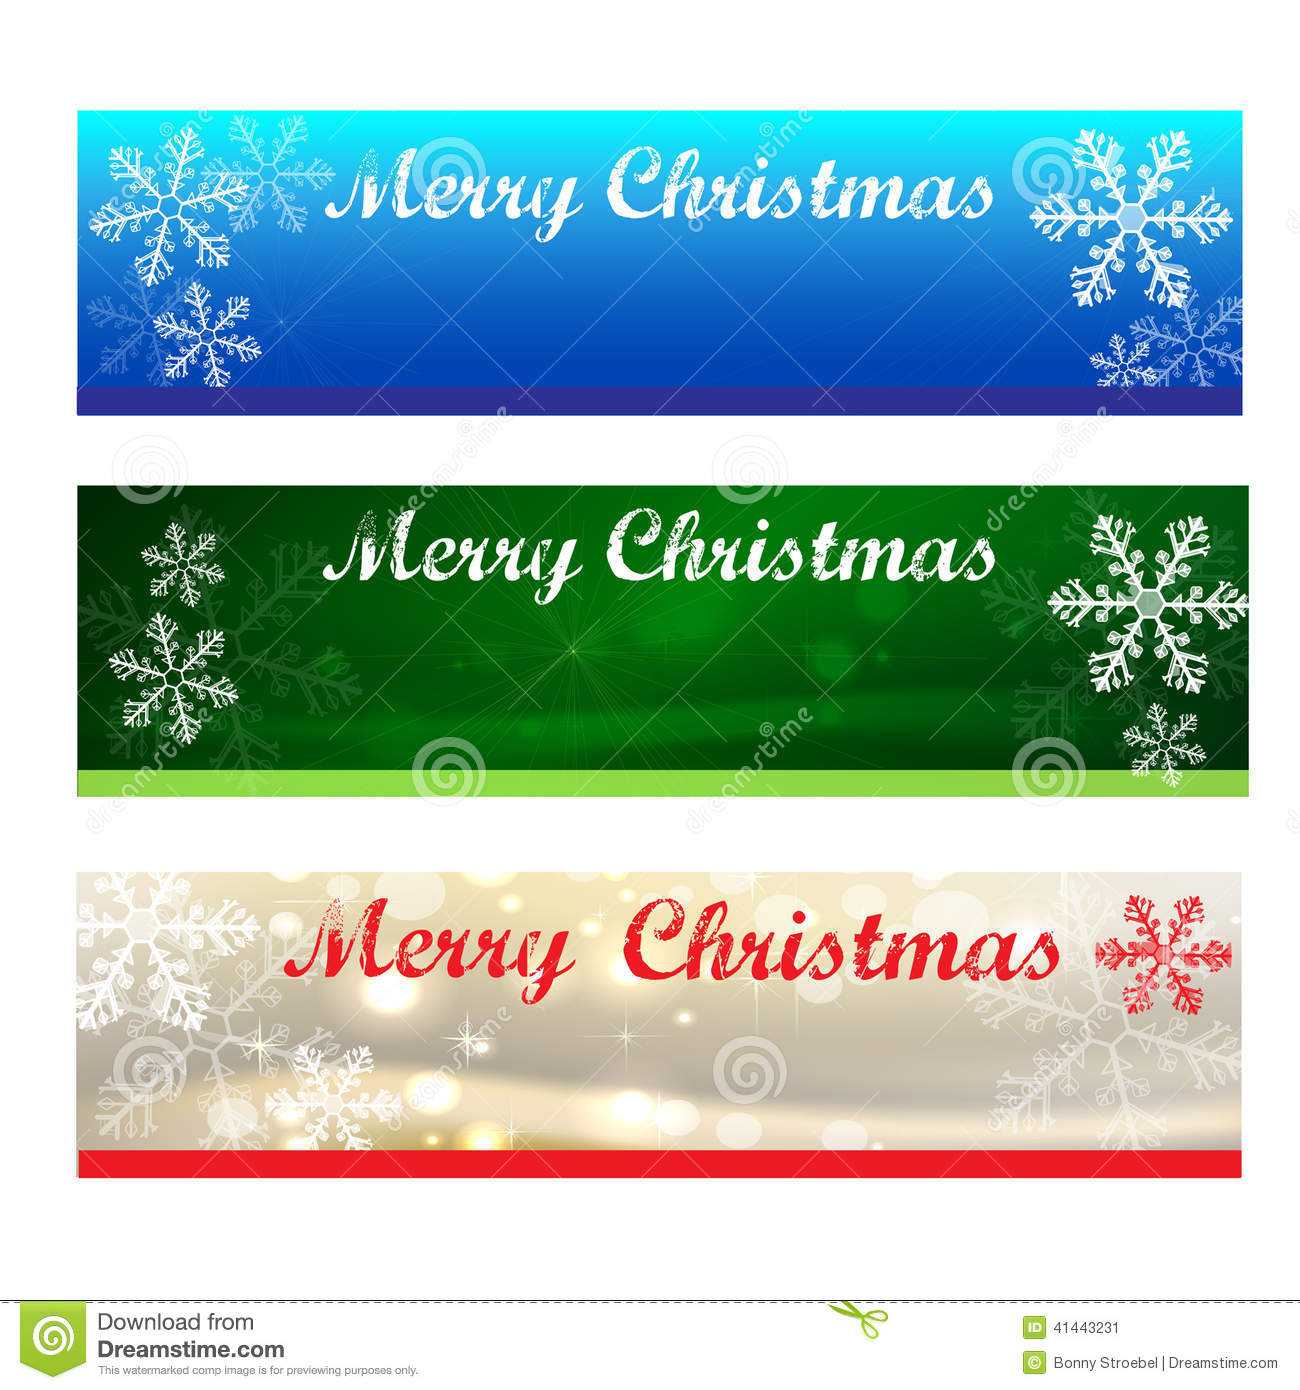 Merry Christmas Banners Stock Illustration. Illustration Of Intended For Merry Christmas Banner Template